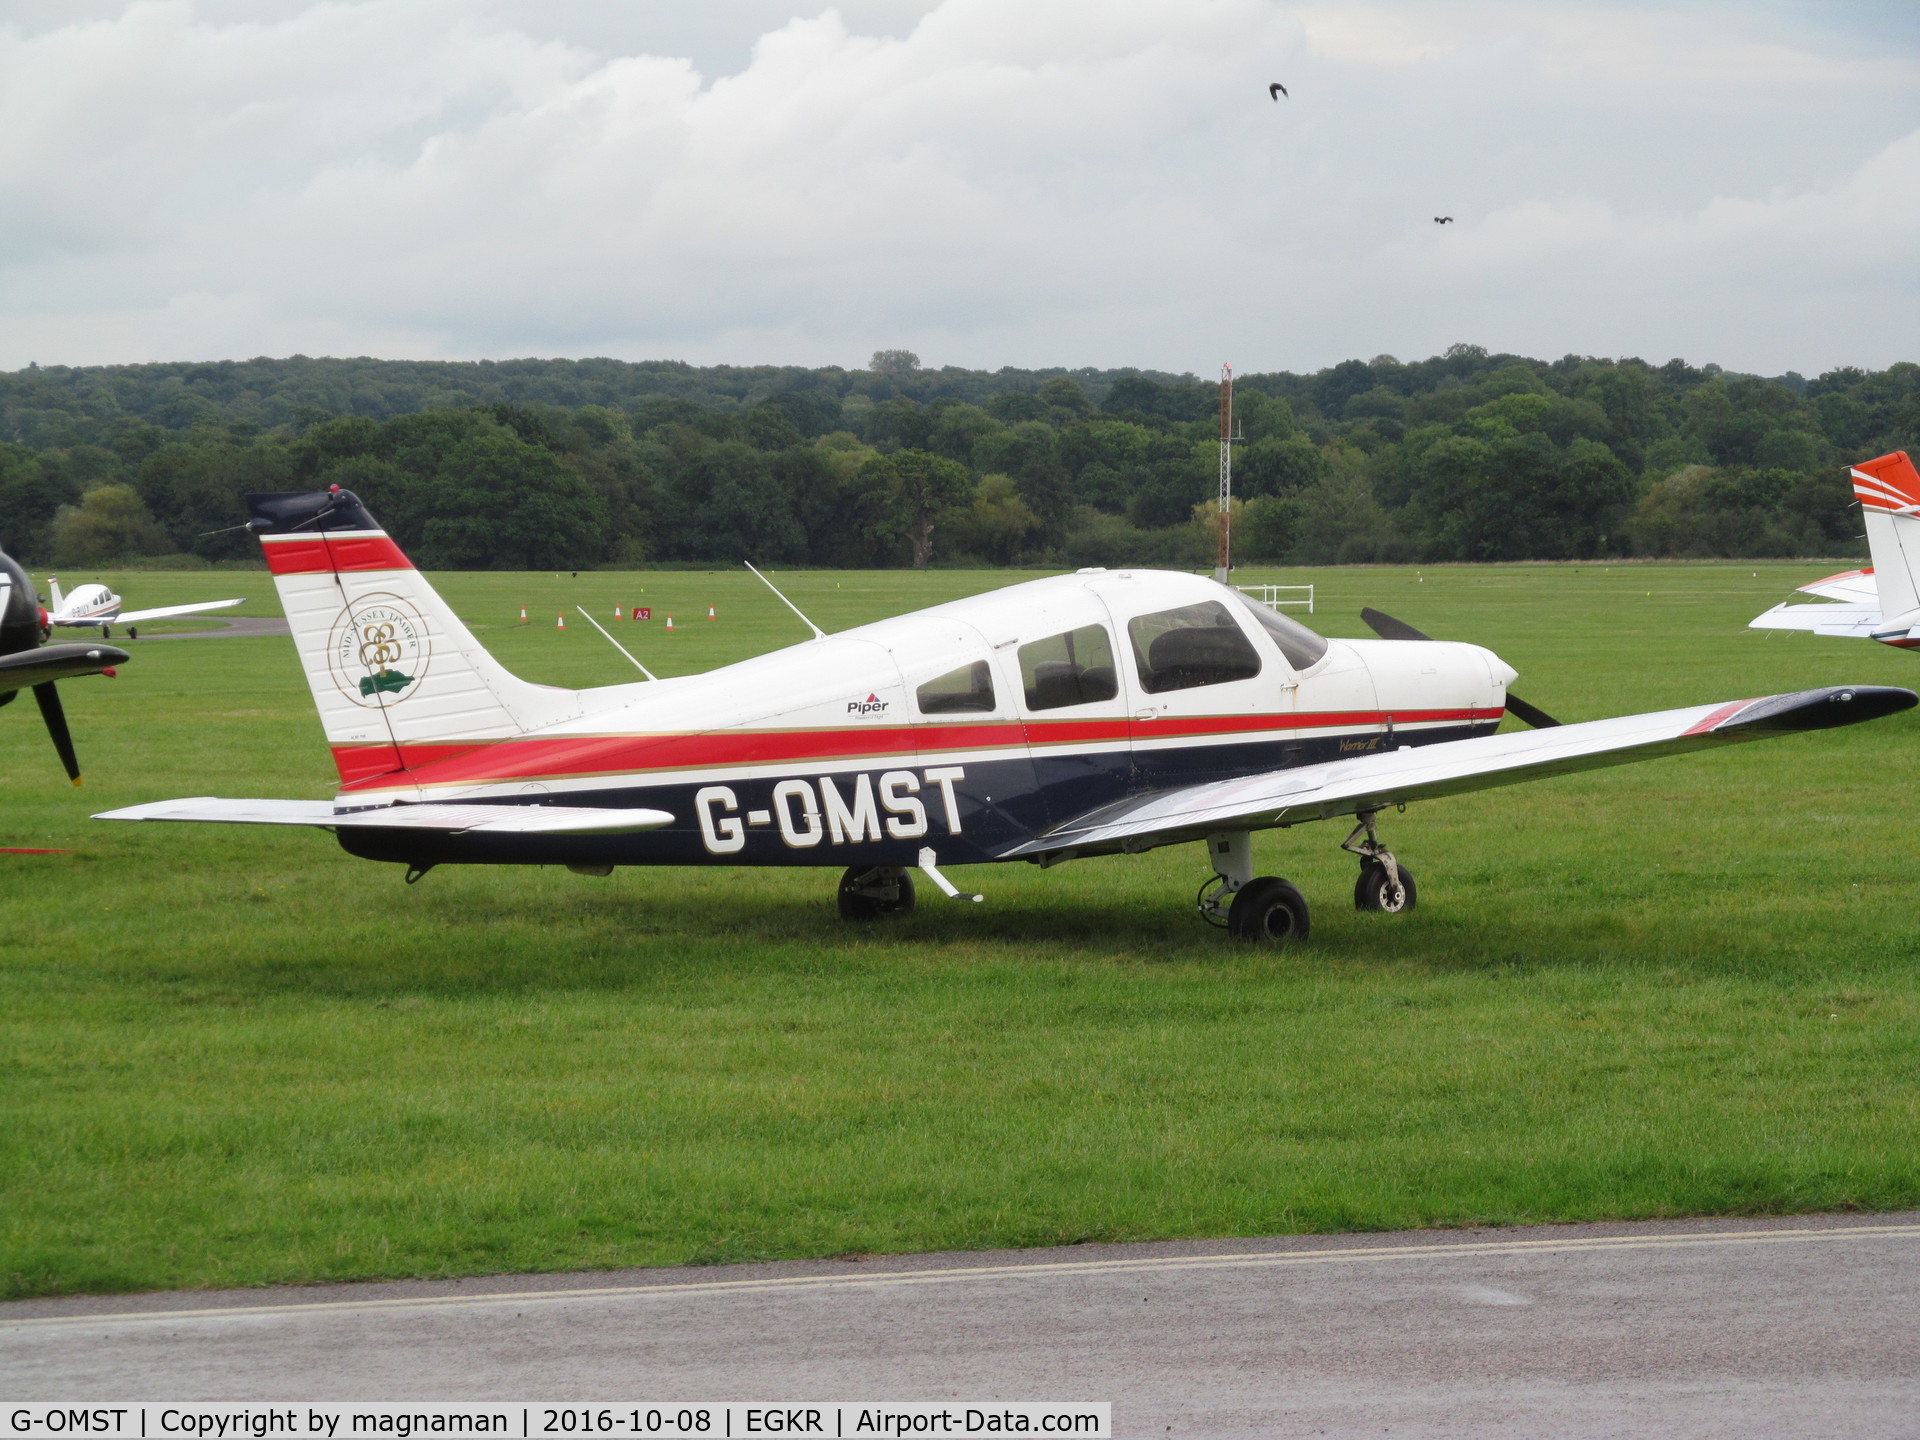 G-OMST, 2001 Piper PA-28-161 Cherokee Warrior III C/N 2842121, on grass at redhill